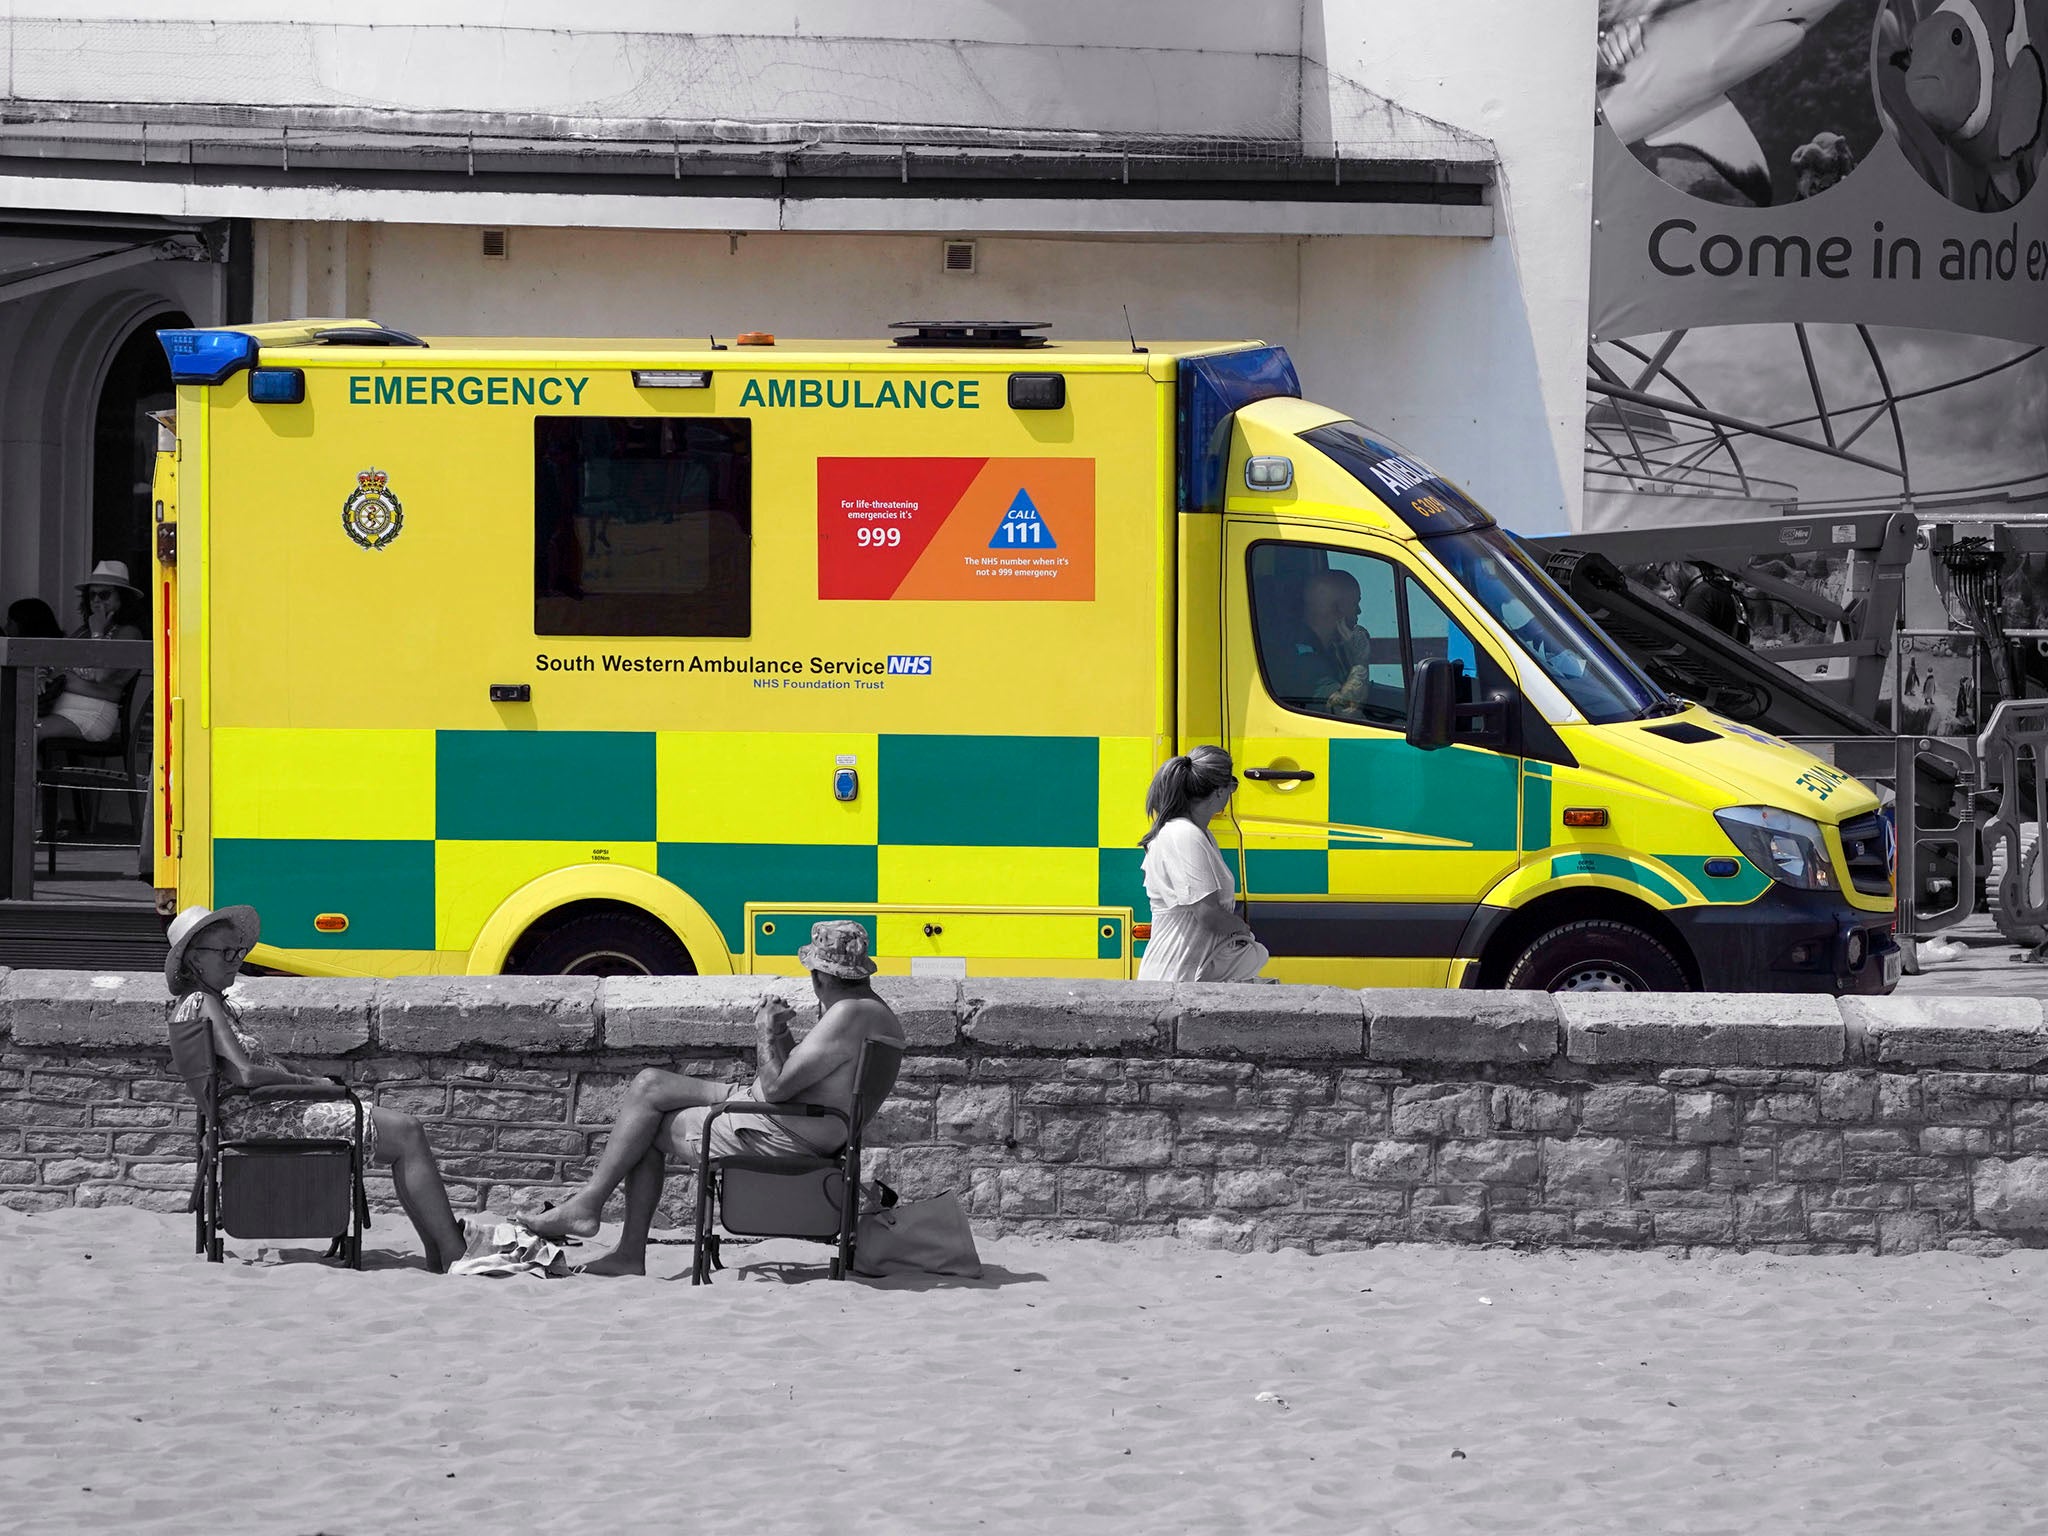 The ambulance service has warned it will not be able to reach some patients requiring urgent attention